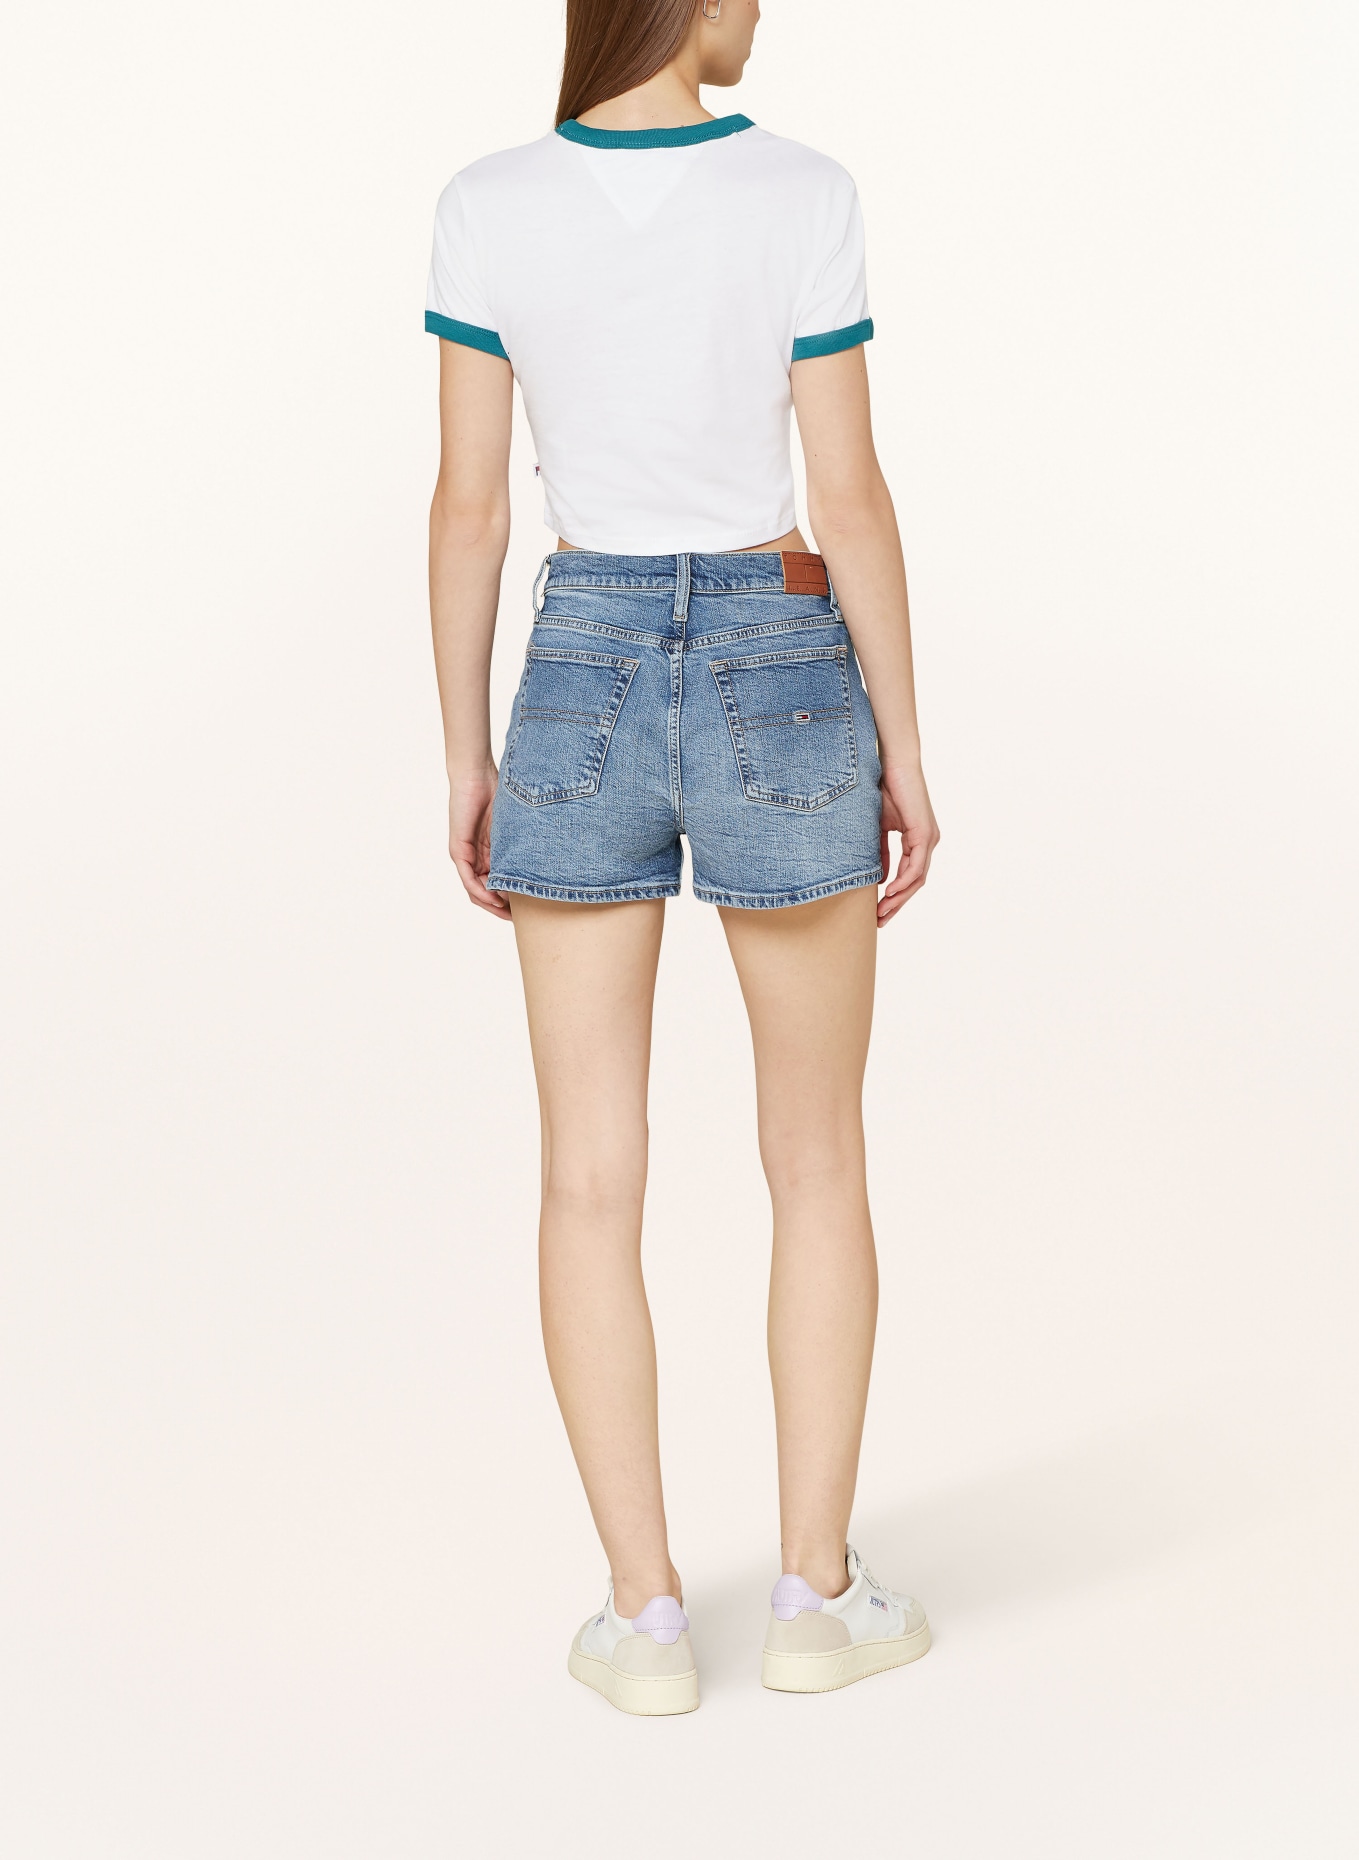 TOMMY JEANS Cropped-Shirt, Farbe: WEISS/ PETROL (Bild 3)